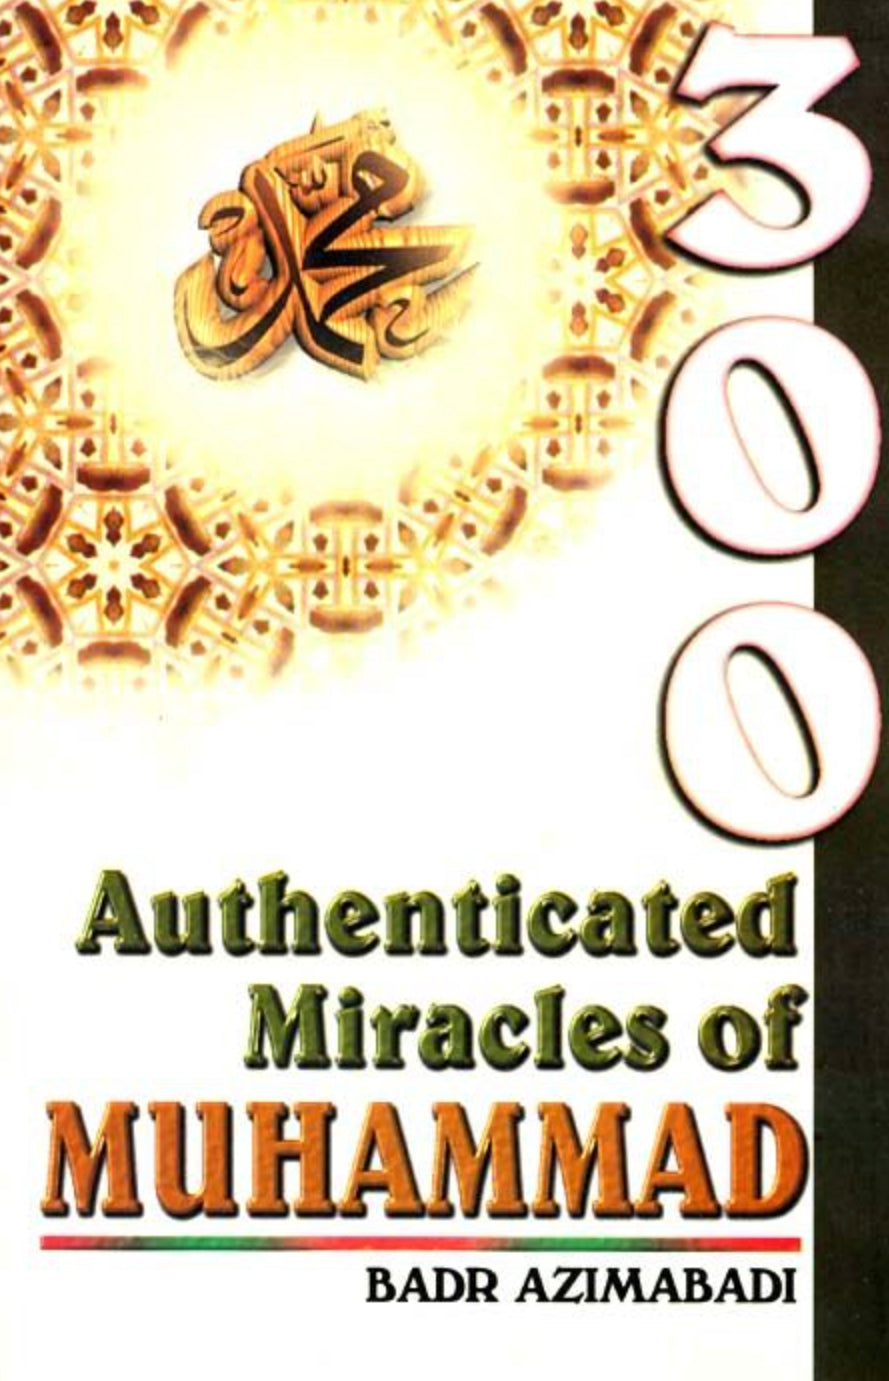 300 Authenticated Miracles of Muhammad (pbuh)